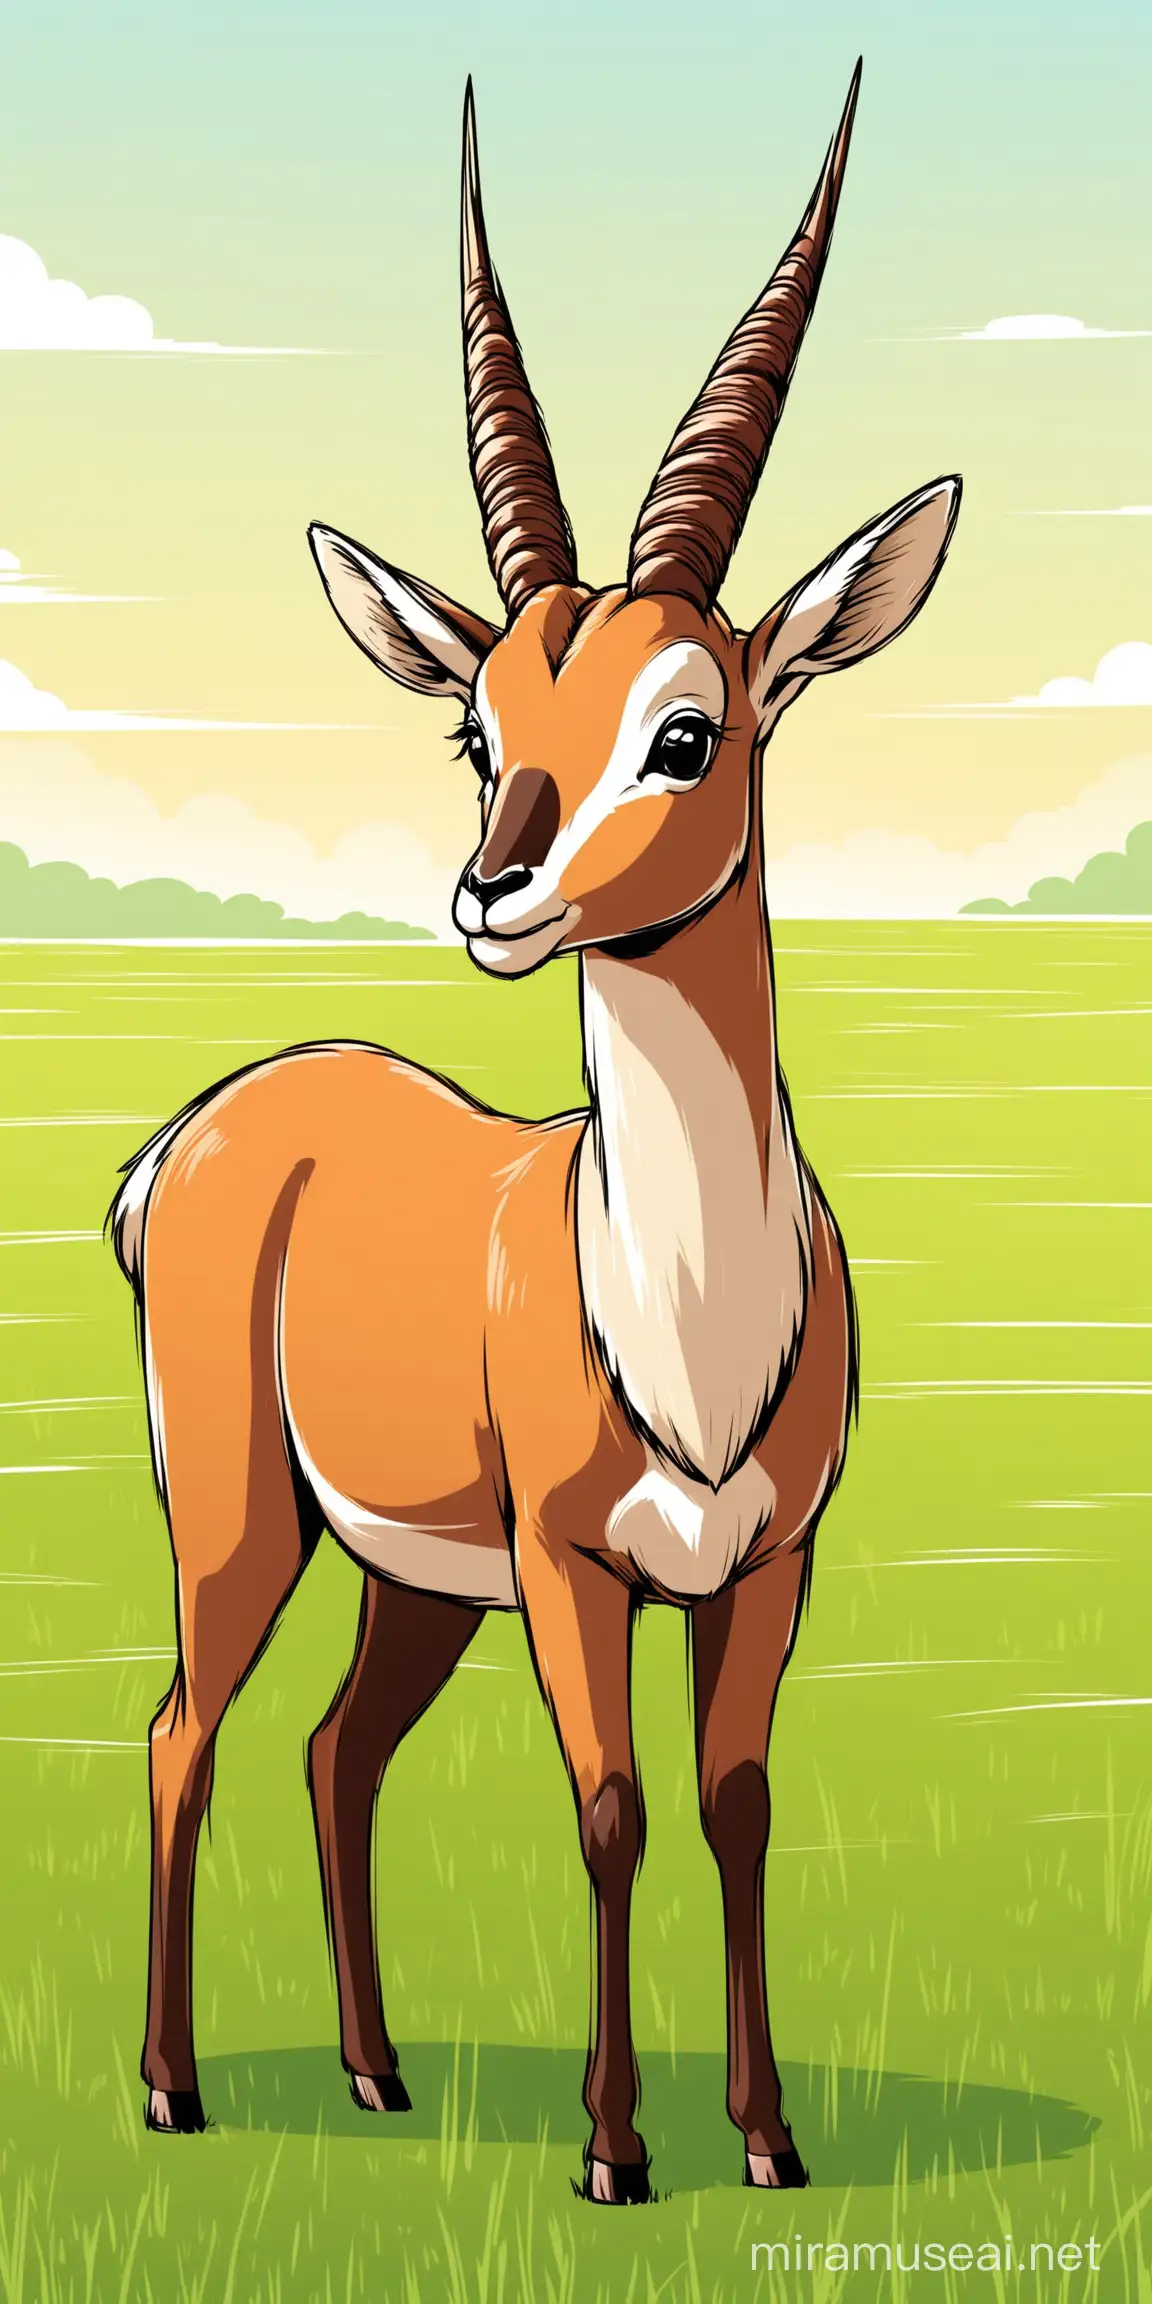 antelope standing on an open field cartoon style with thick lines, no shading